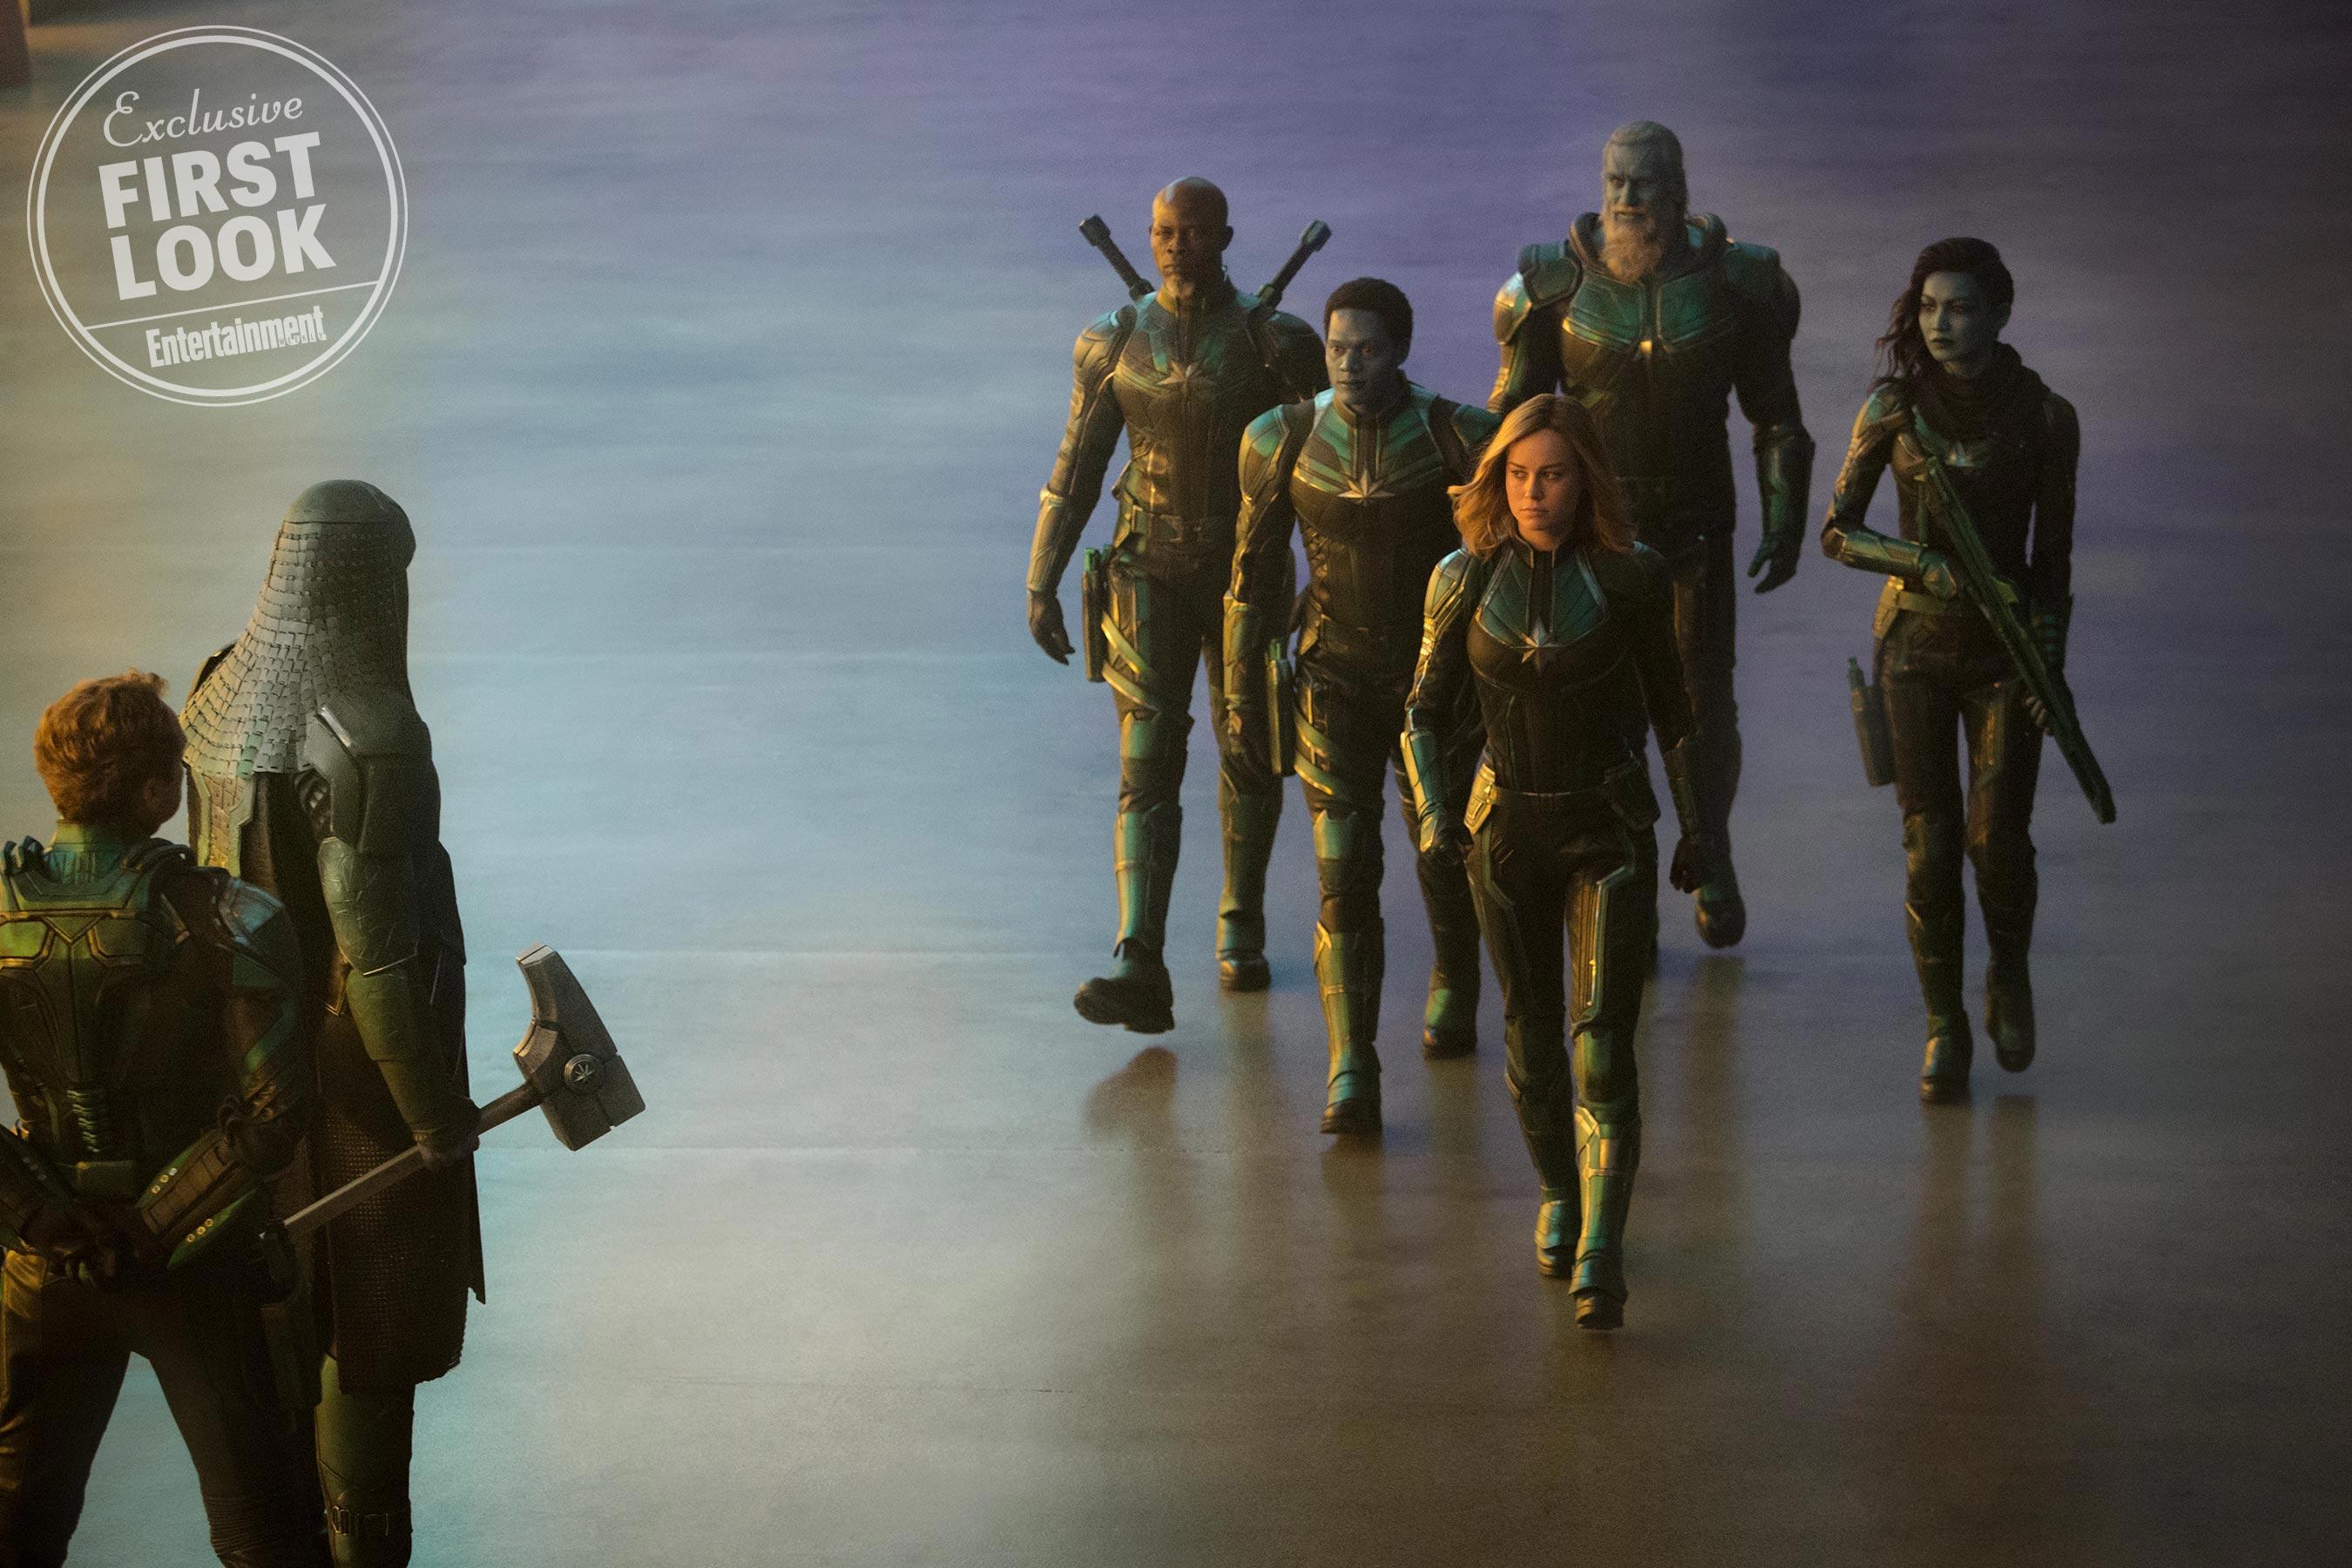 Captain Marvel Image Reveal Skrulls, Talos, and Young Nick Fury